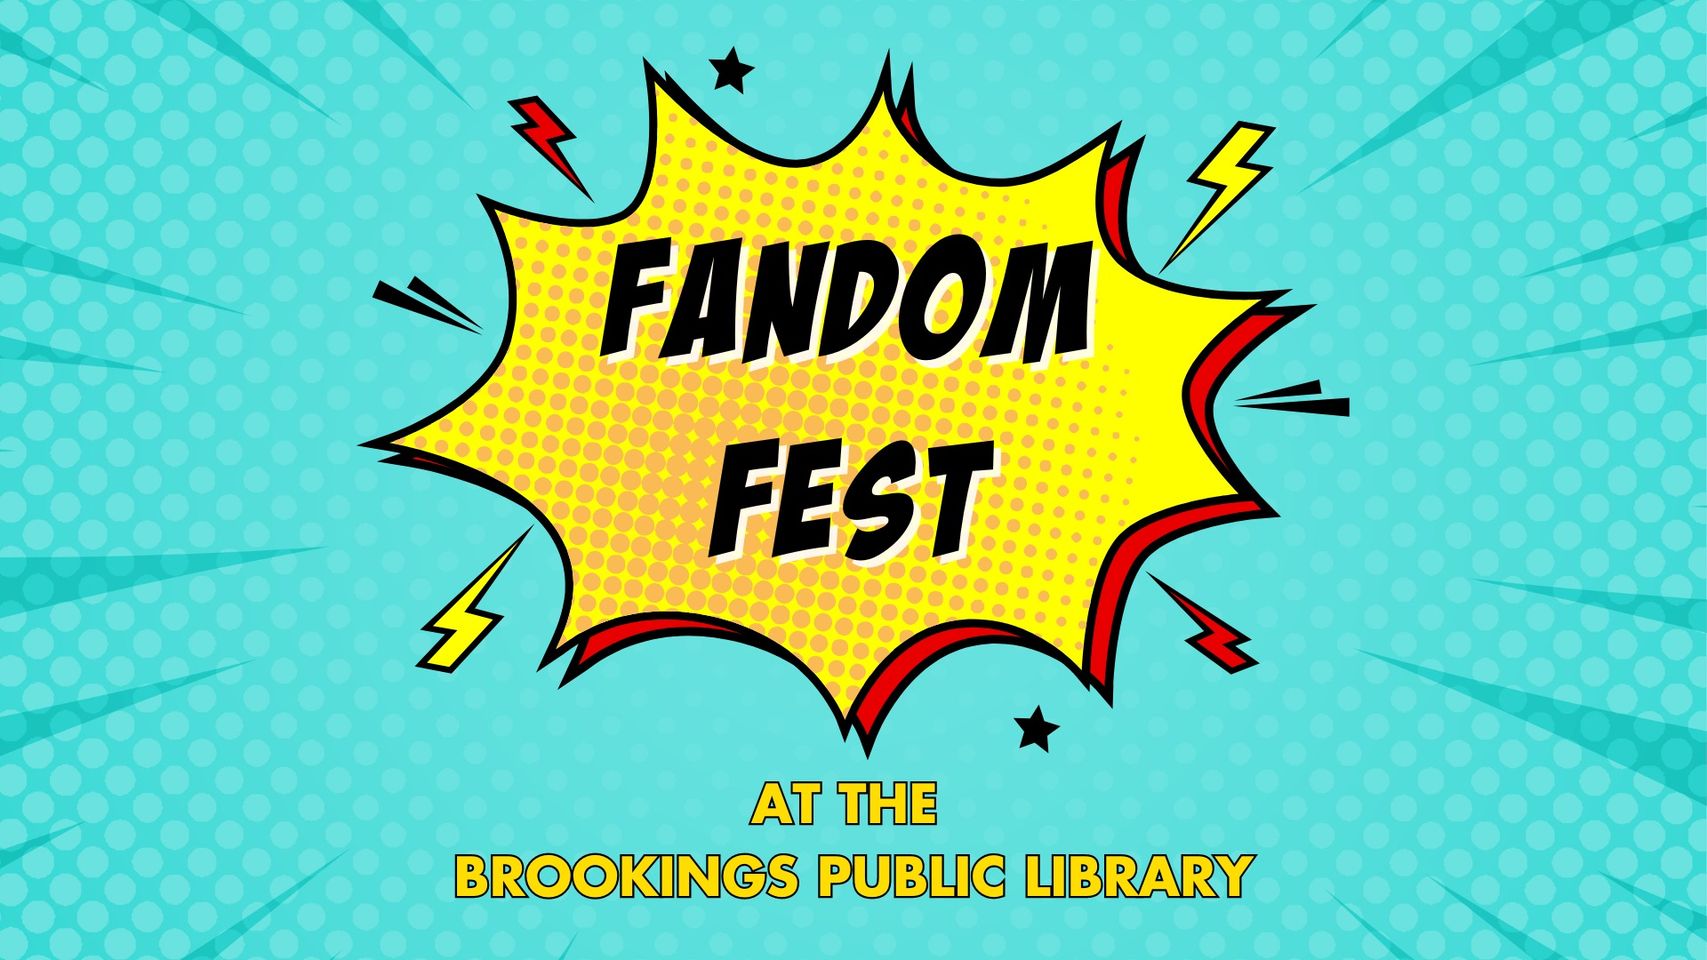 Fandom Fest at the Brookings Public Library